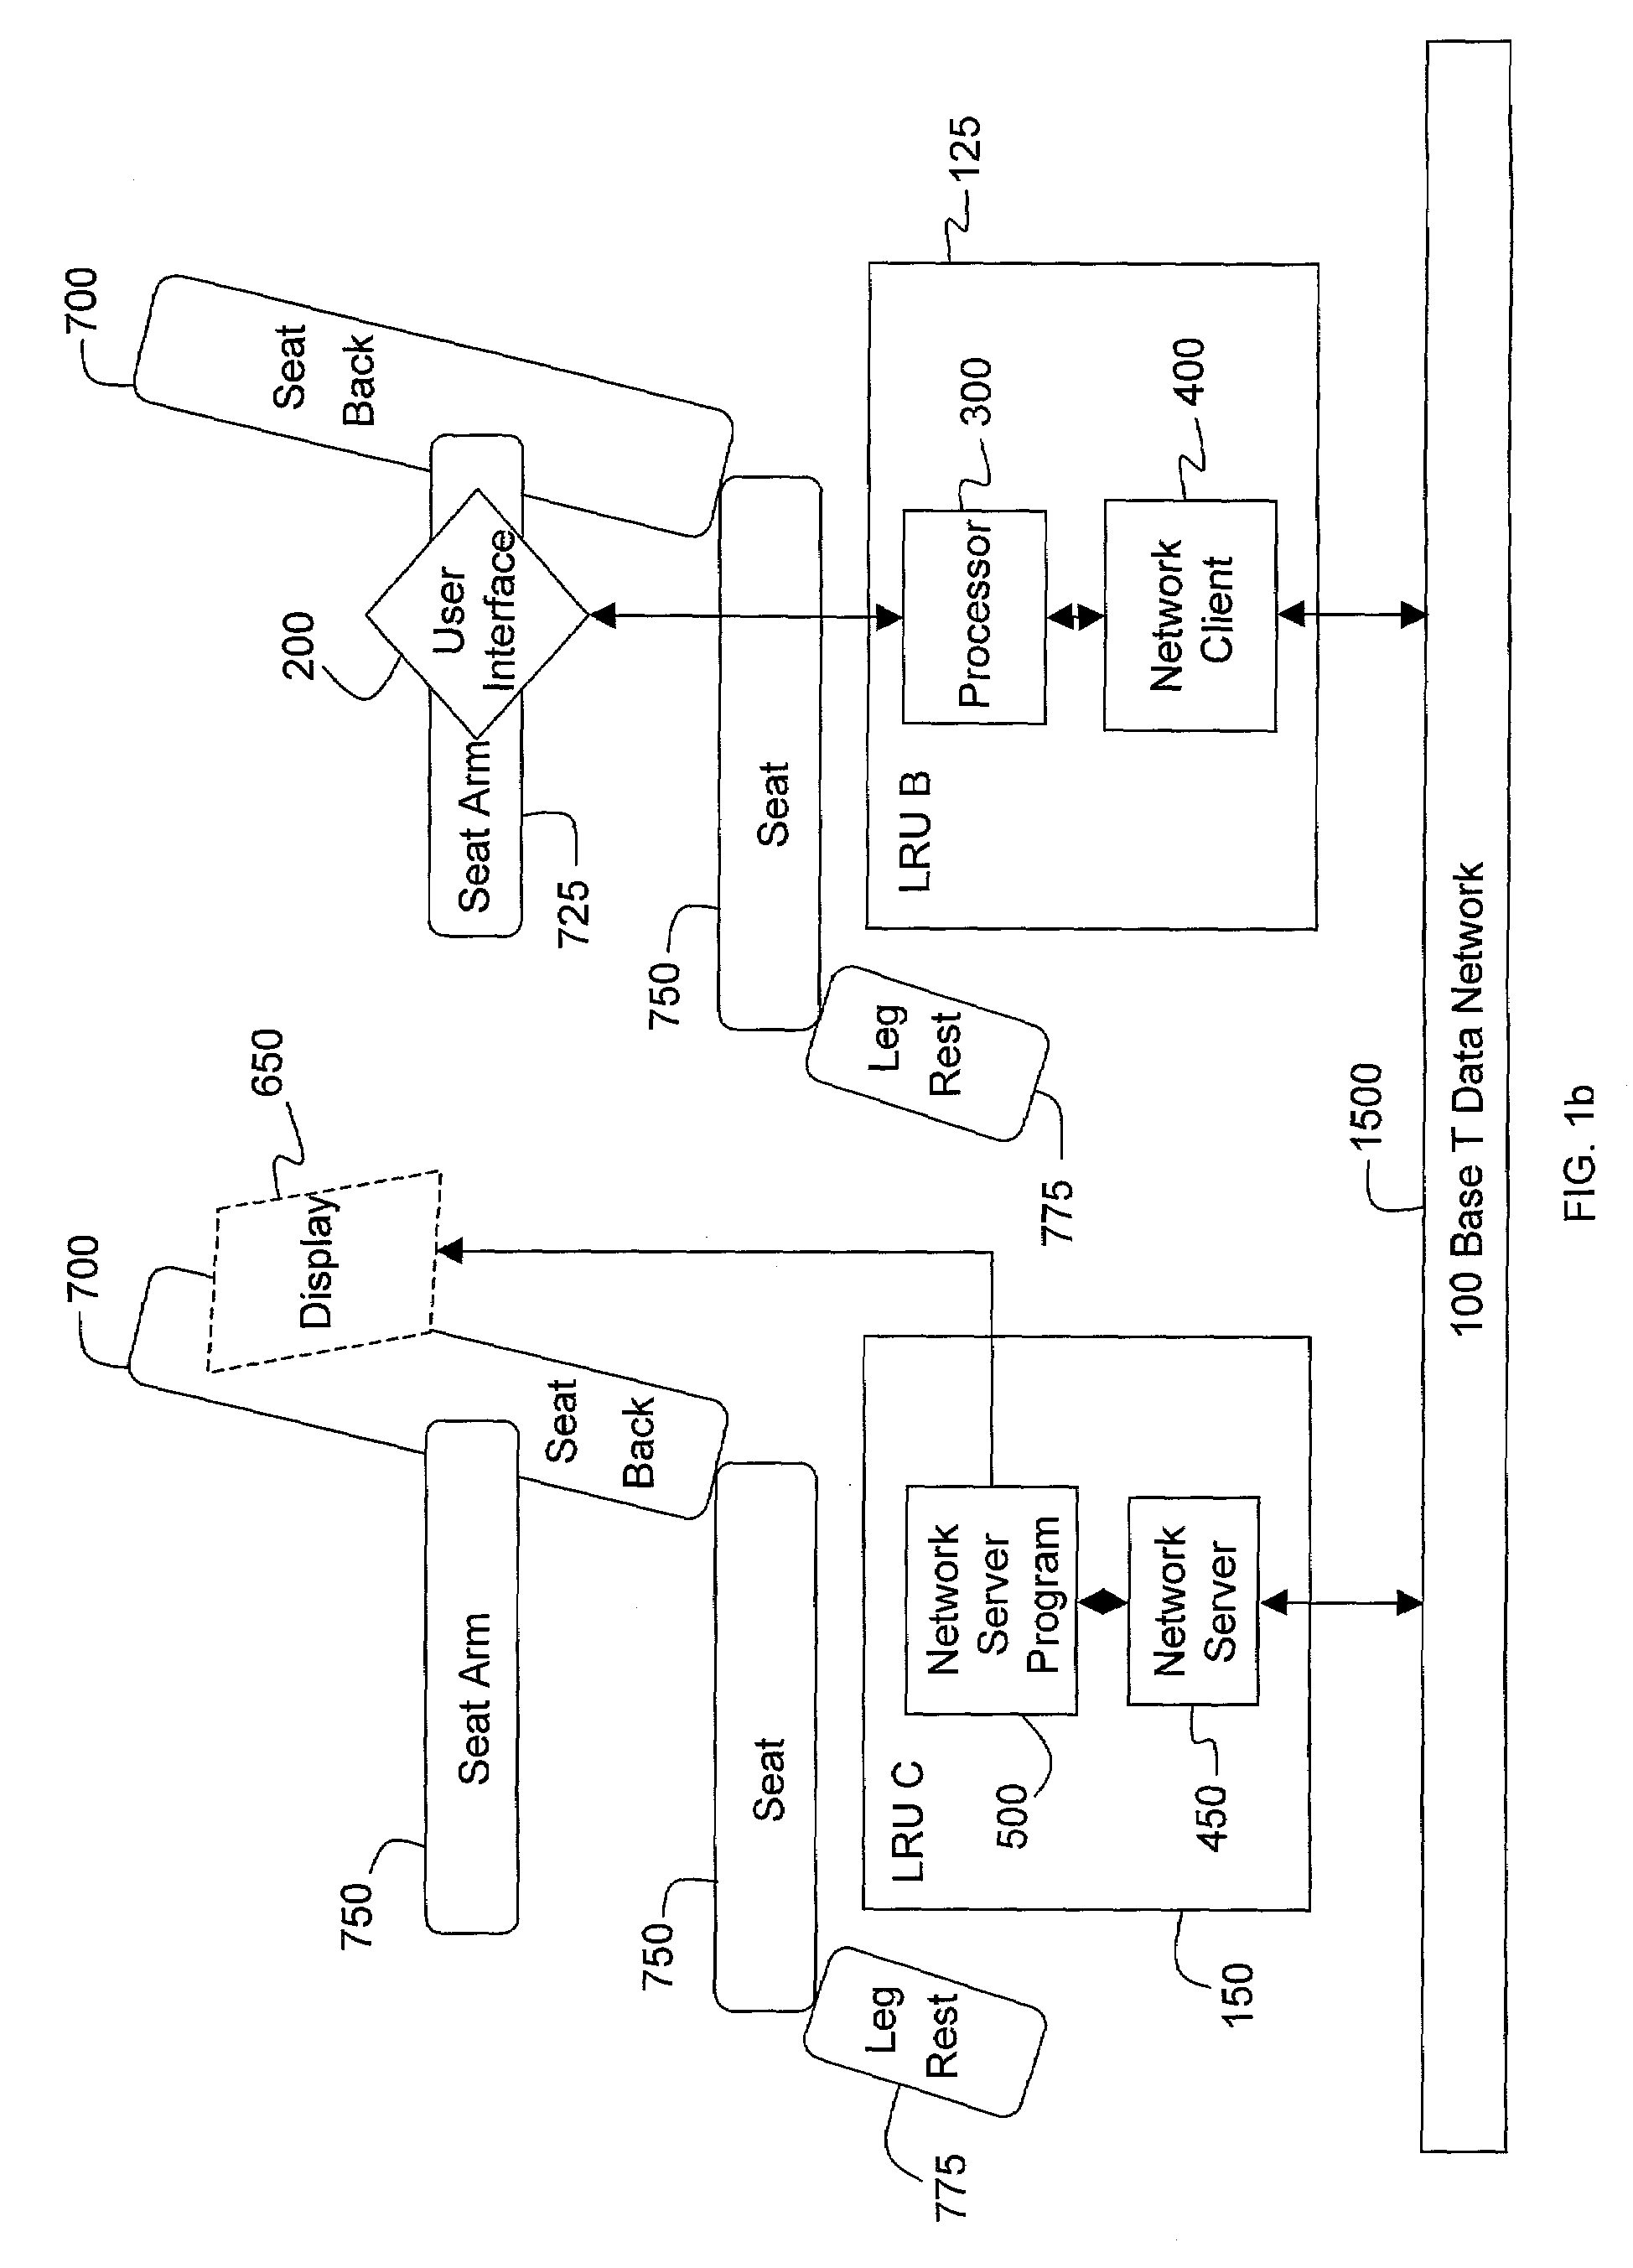 Method for controlling an in-flight entertainment system